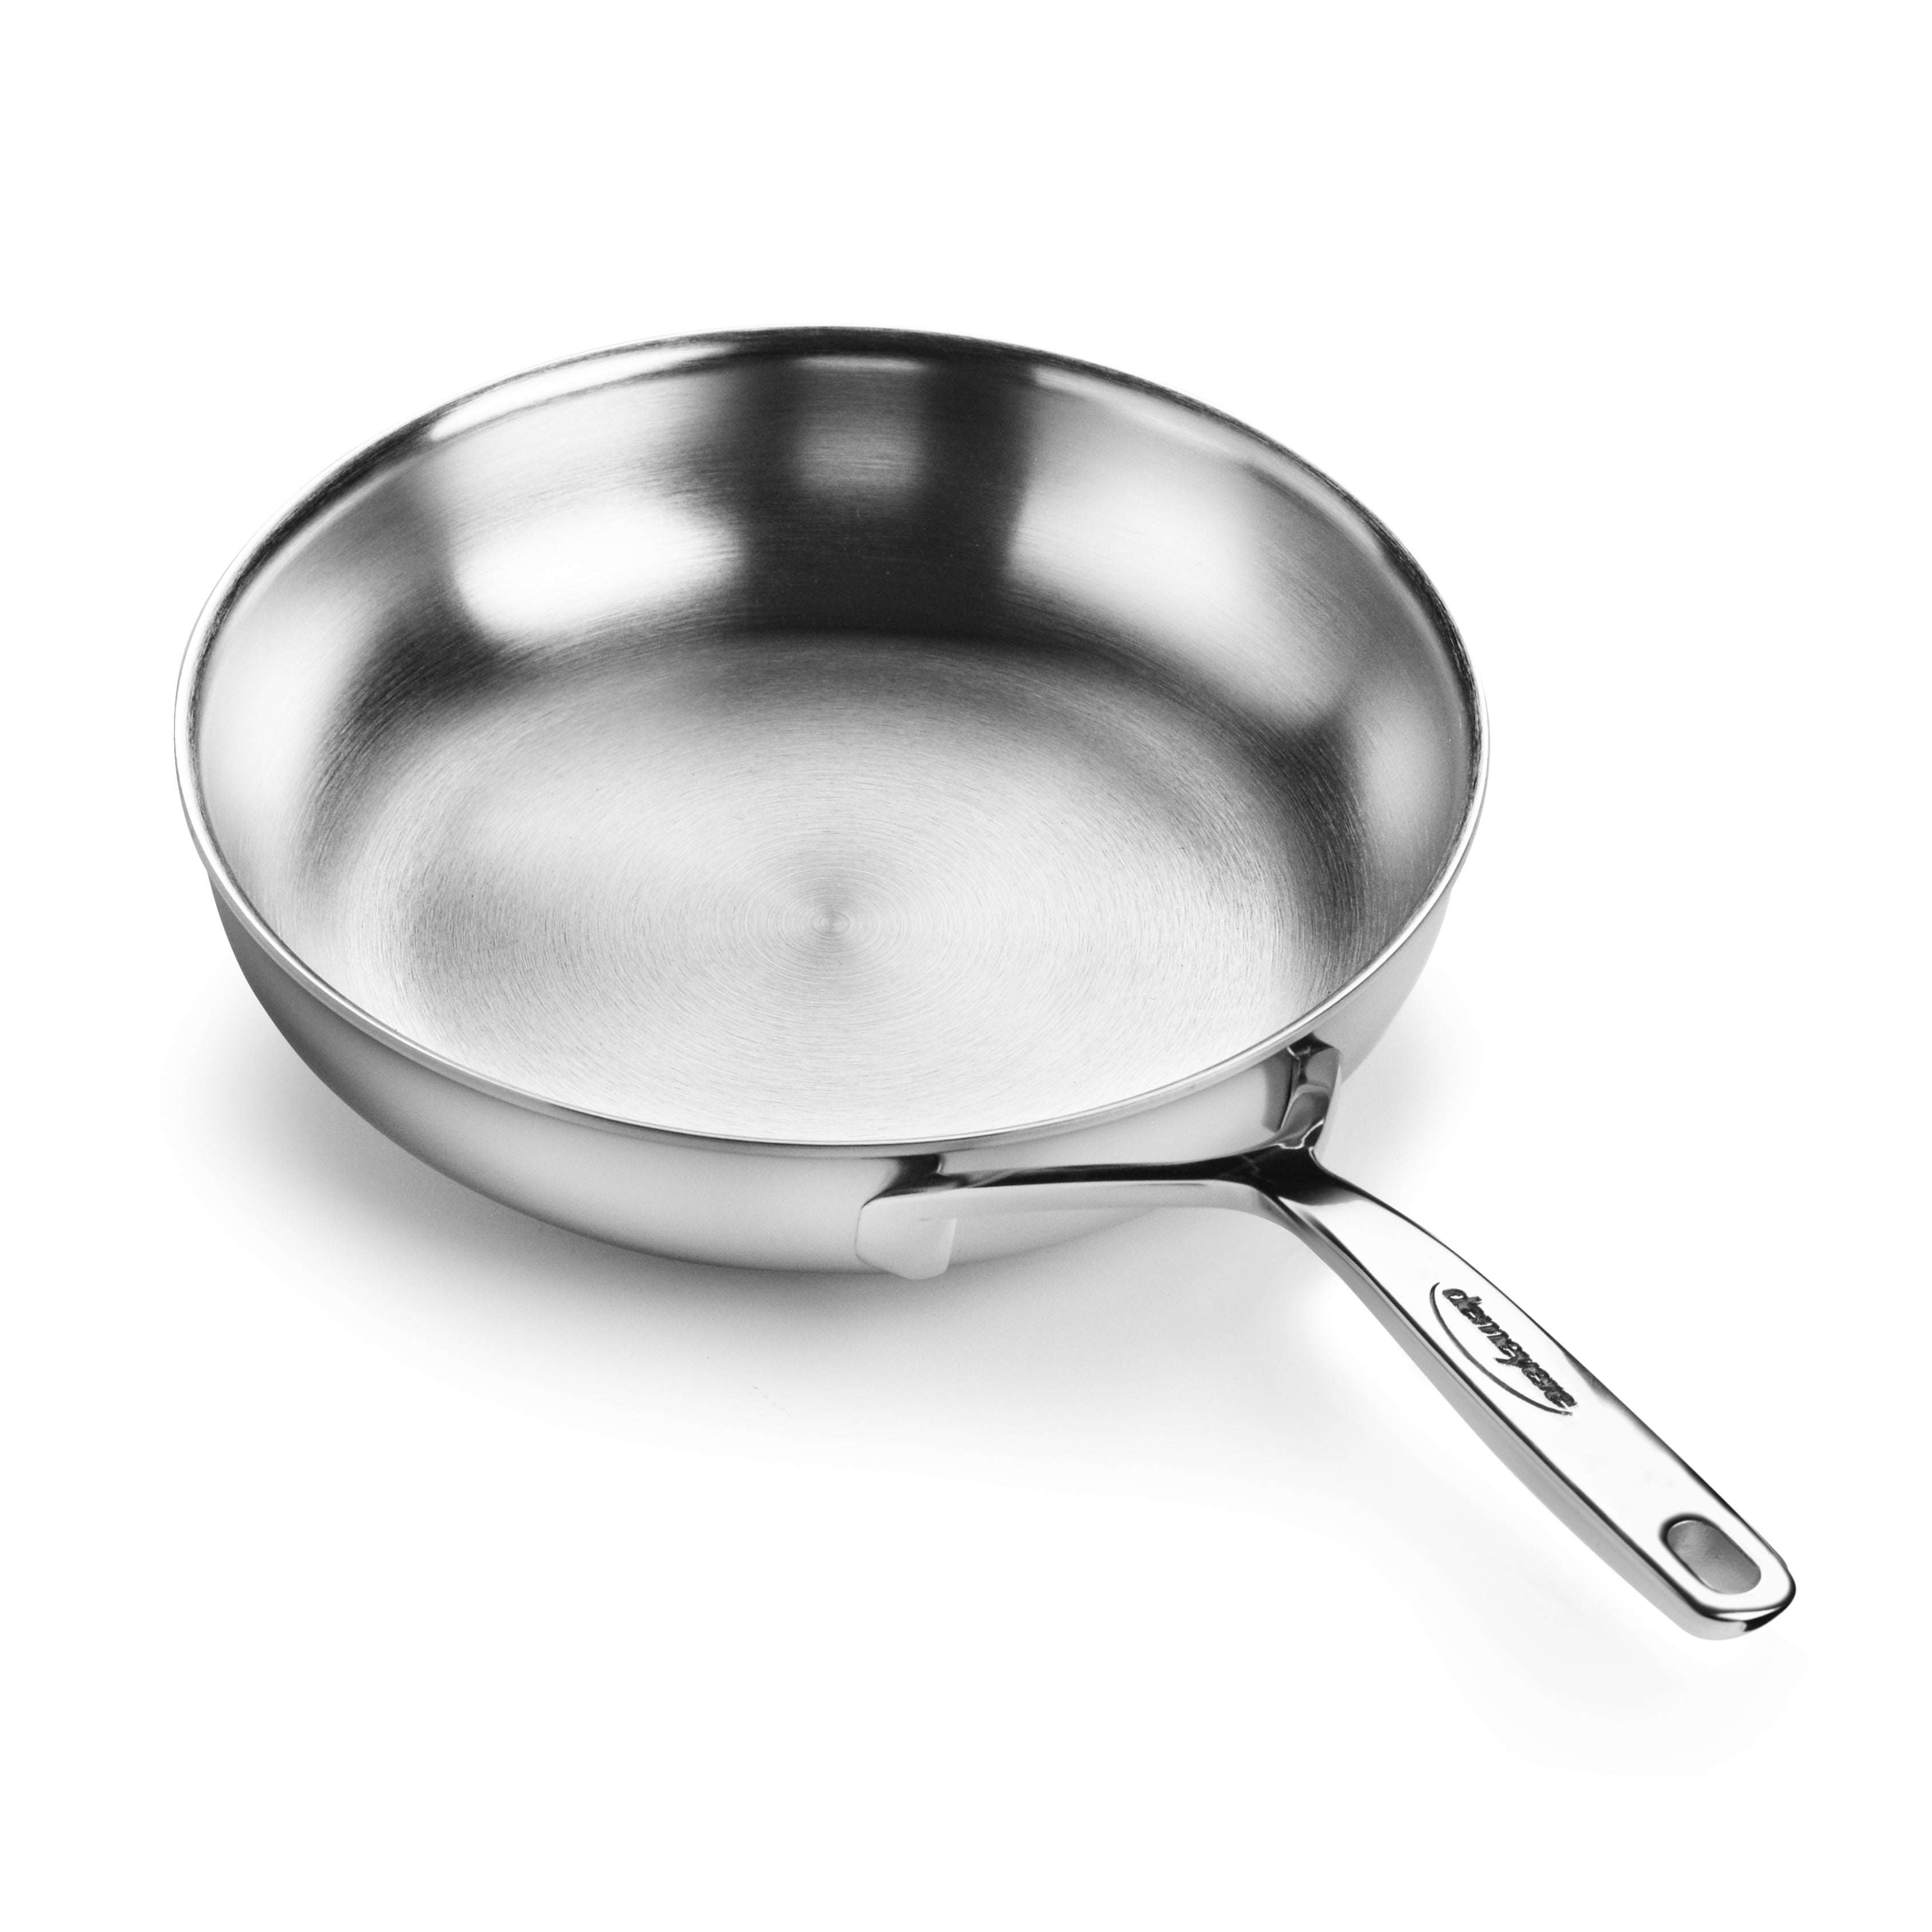 All-Clad d5 Stainless-Steel Nonstick 10.5 inch Omelette Pan